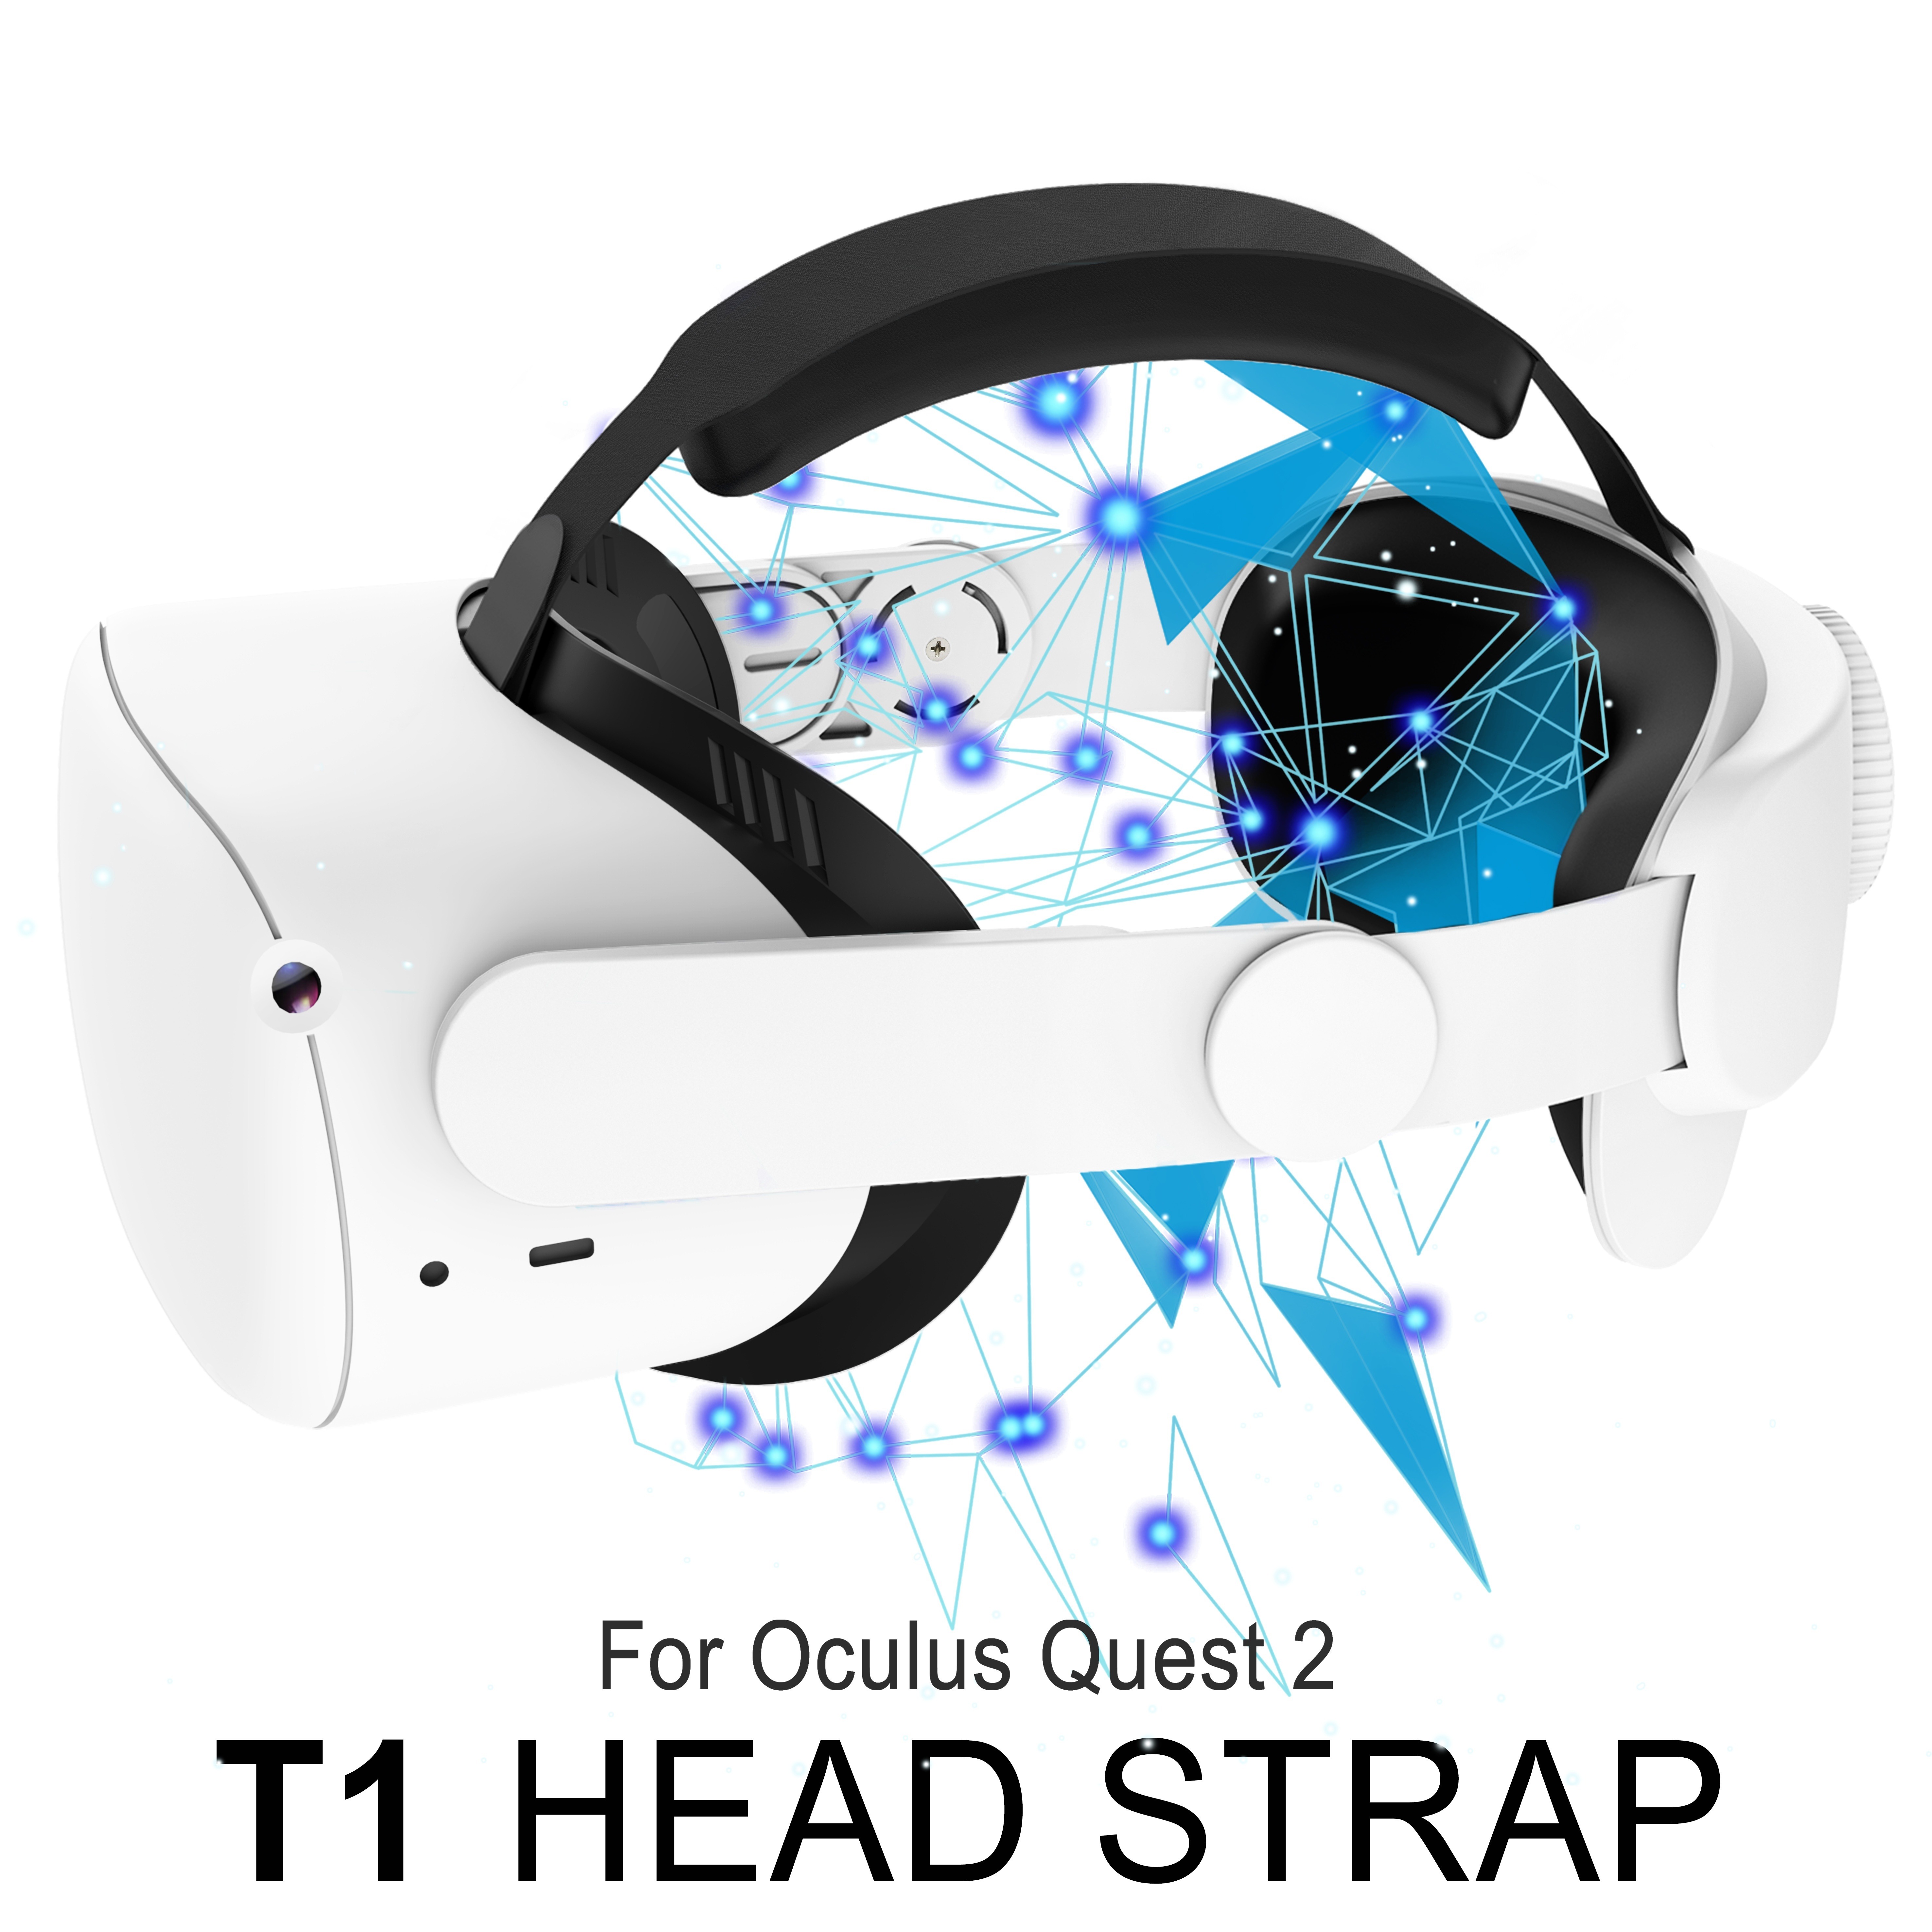 elite strap compatible for oculus quest 2 vr game headstrap adjustable vr headset accessories for replacement comfort support pu surface lightweight